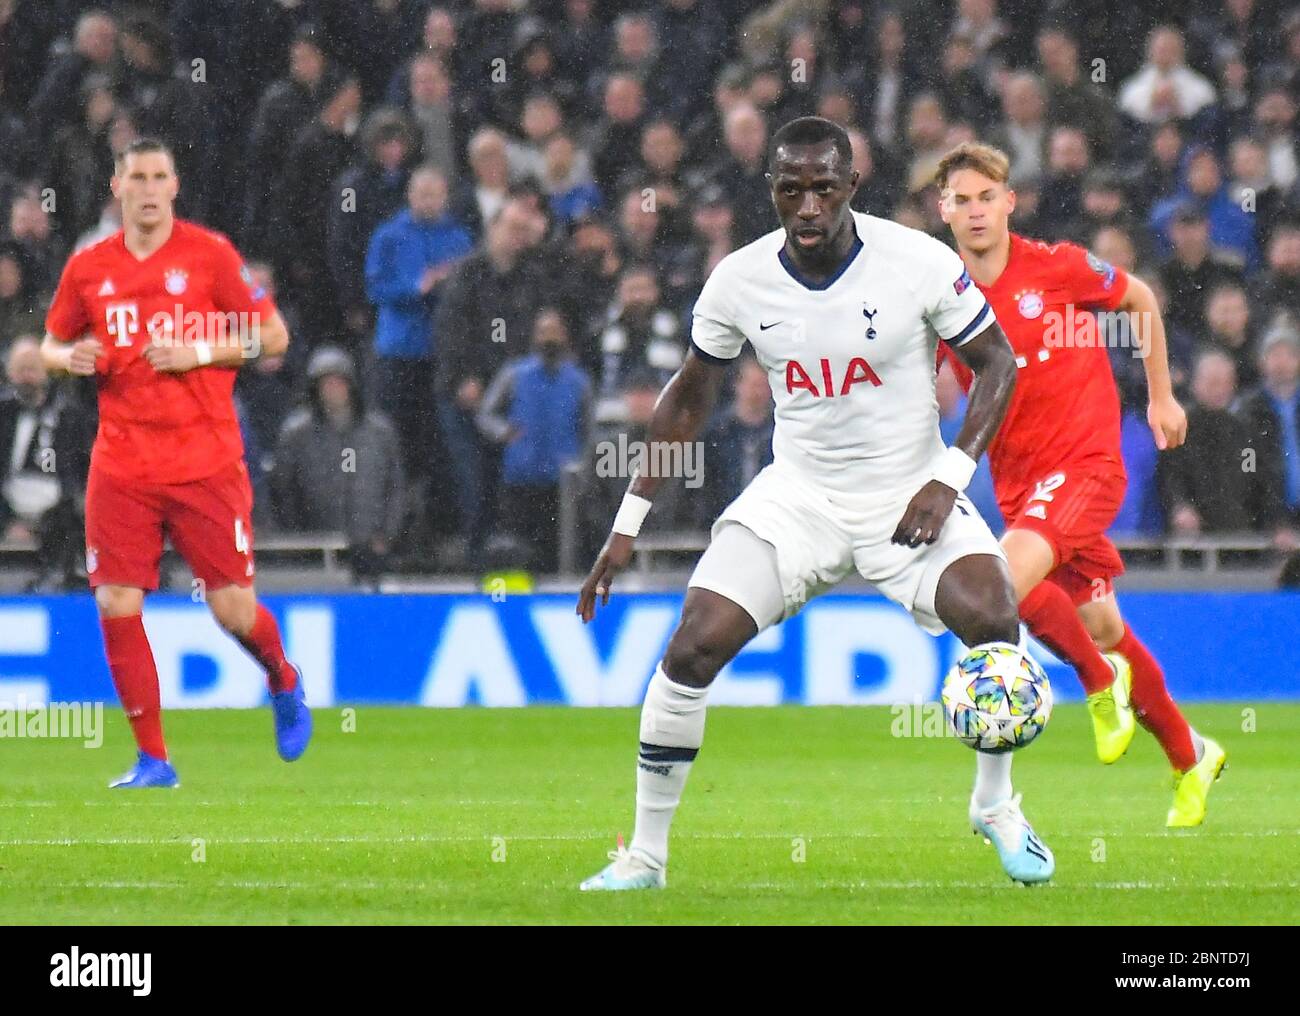 LONDON, ENGLAND - OCTOBER 1, 2019: Moussa Sissokko of Tottenham pictured during the 2019/20 UEFA Champions League Group B game between Tottenham Hotspur FC (England) and Bayern Munchen (Germany) at Tottenham Hotspur Stadium. Stock Photo